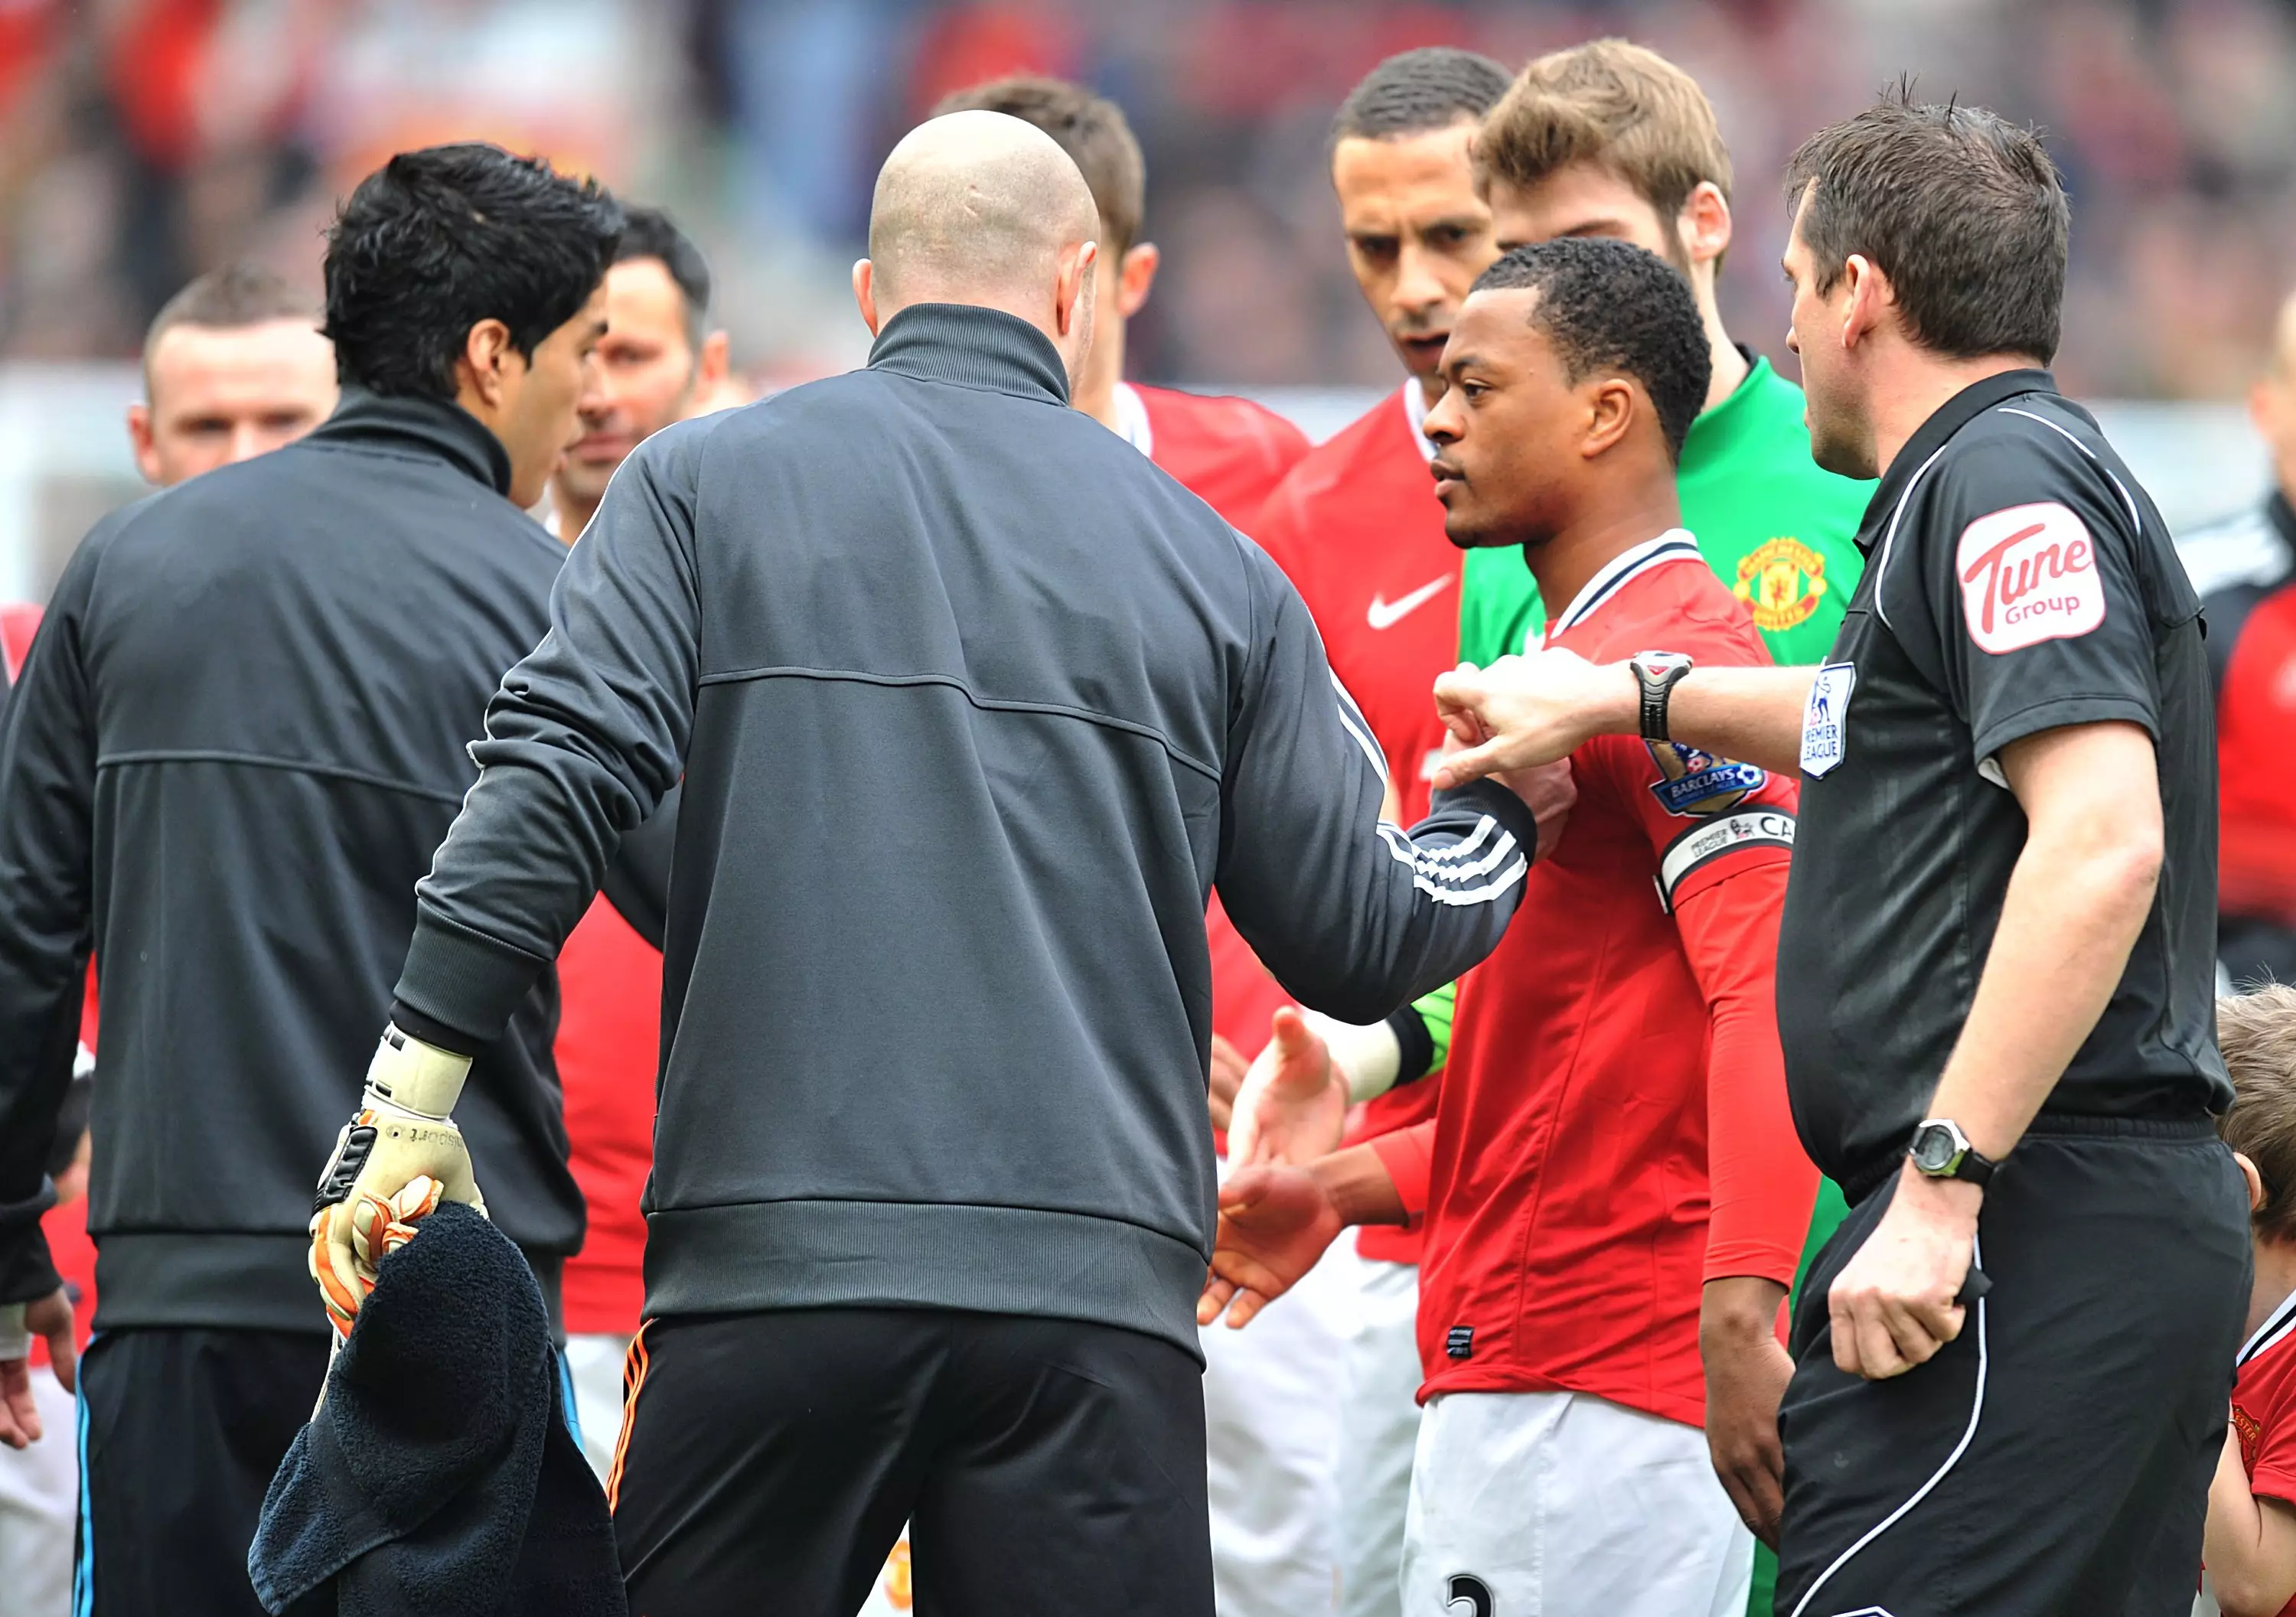 Suarez was handed an eight match ban for his incident with Evra. Image: PA Images